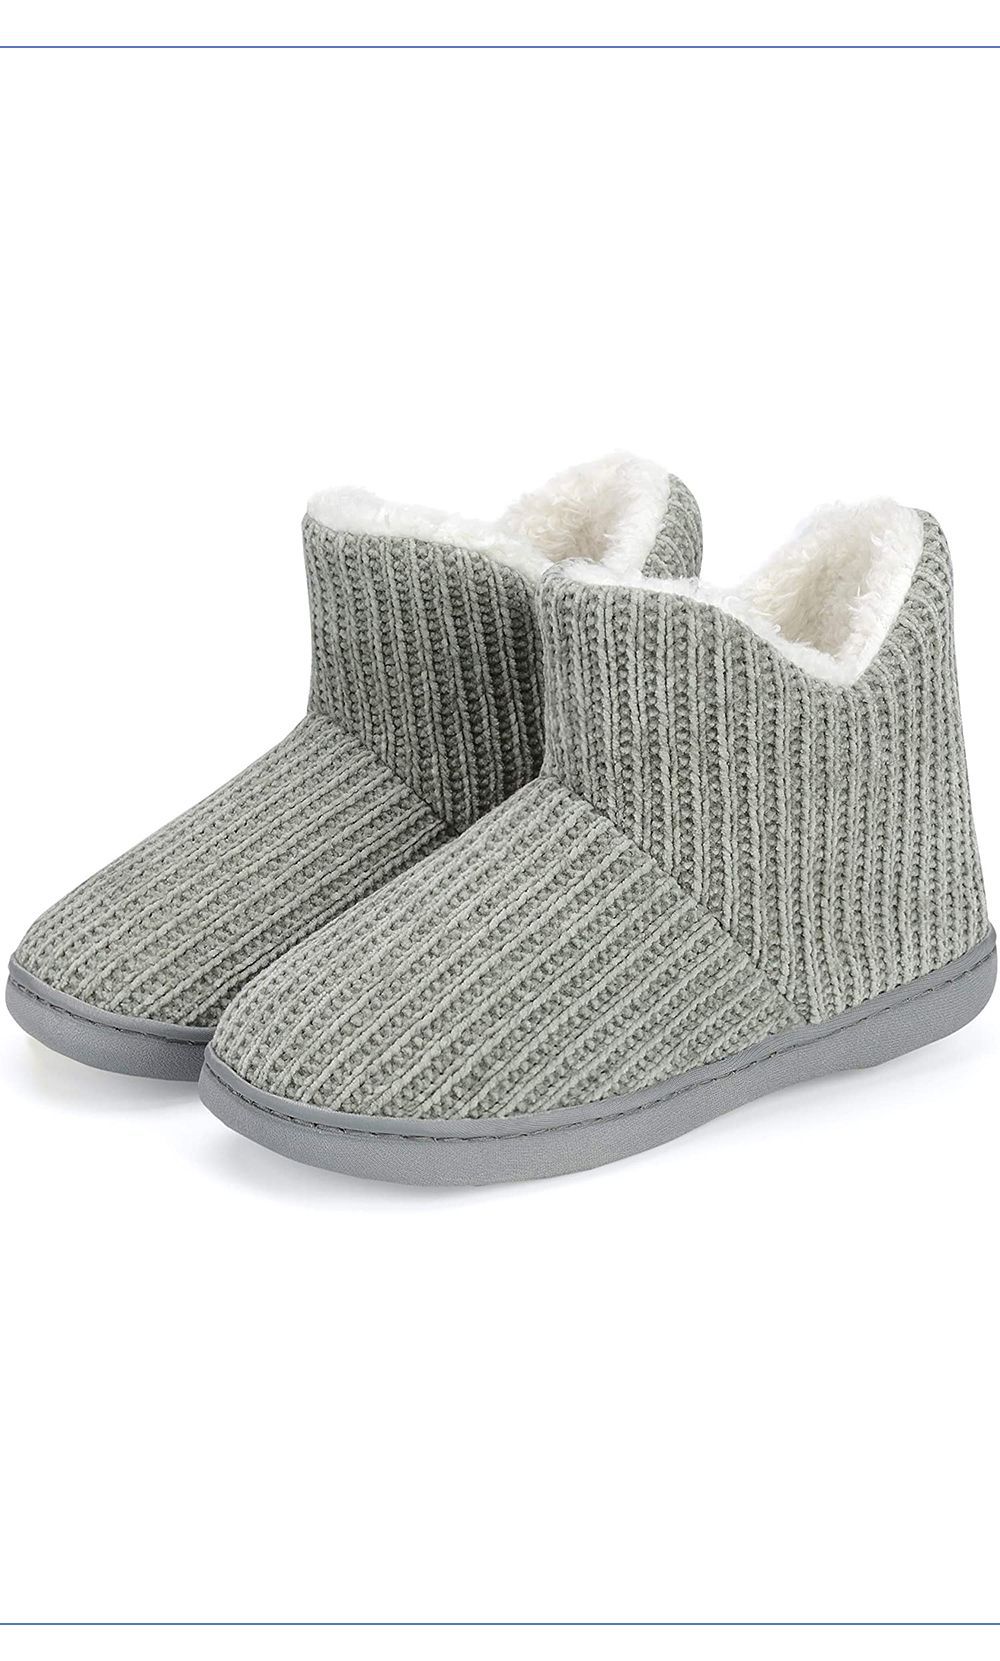 comfy women's house slippers